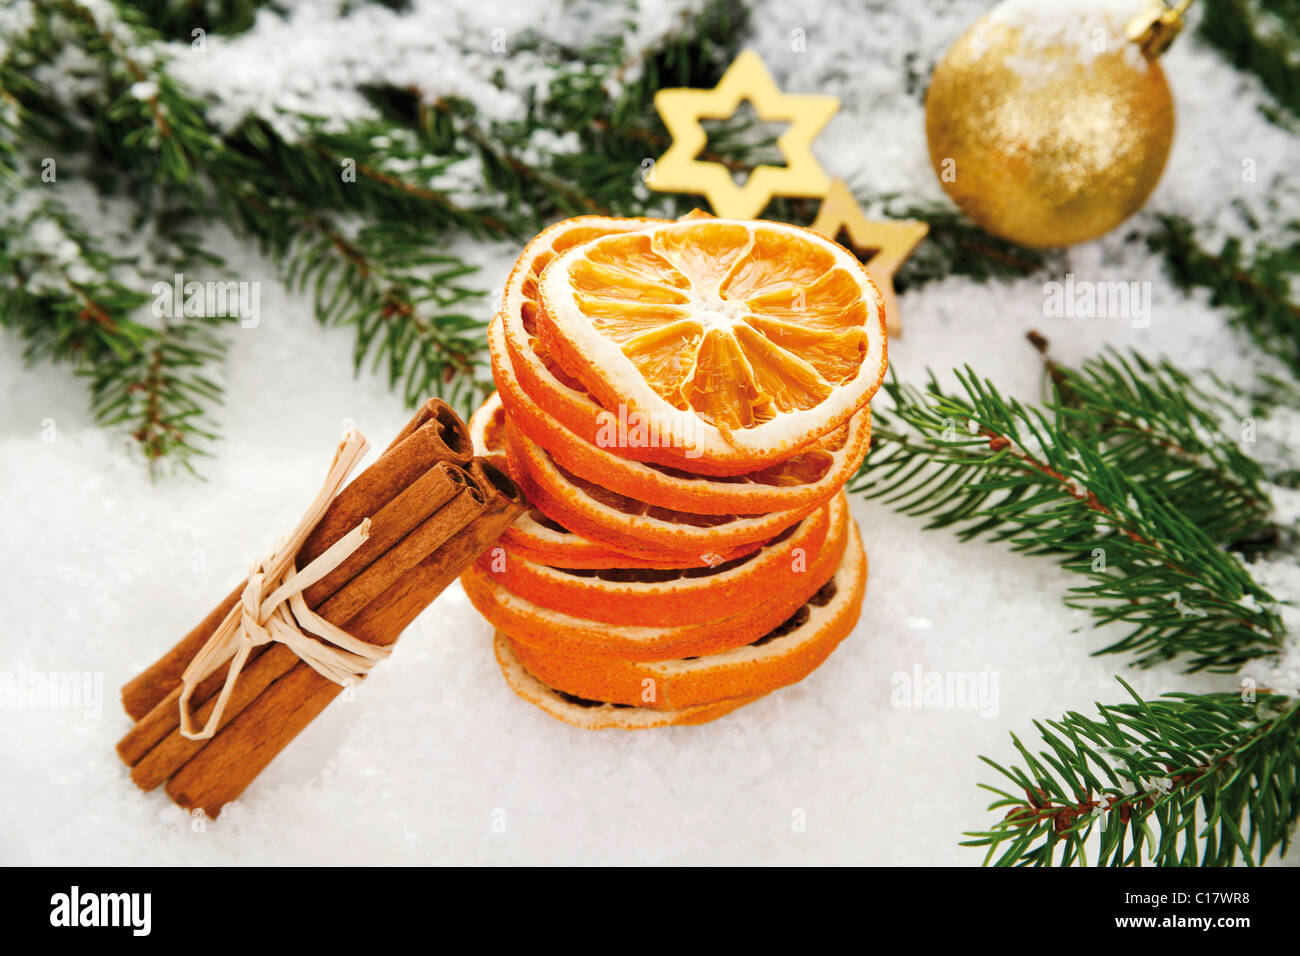 Dried orange slices with cinnamon sticks, a Christmas tree bauble, branches of fir and decorations on snow Stock Photo